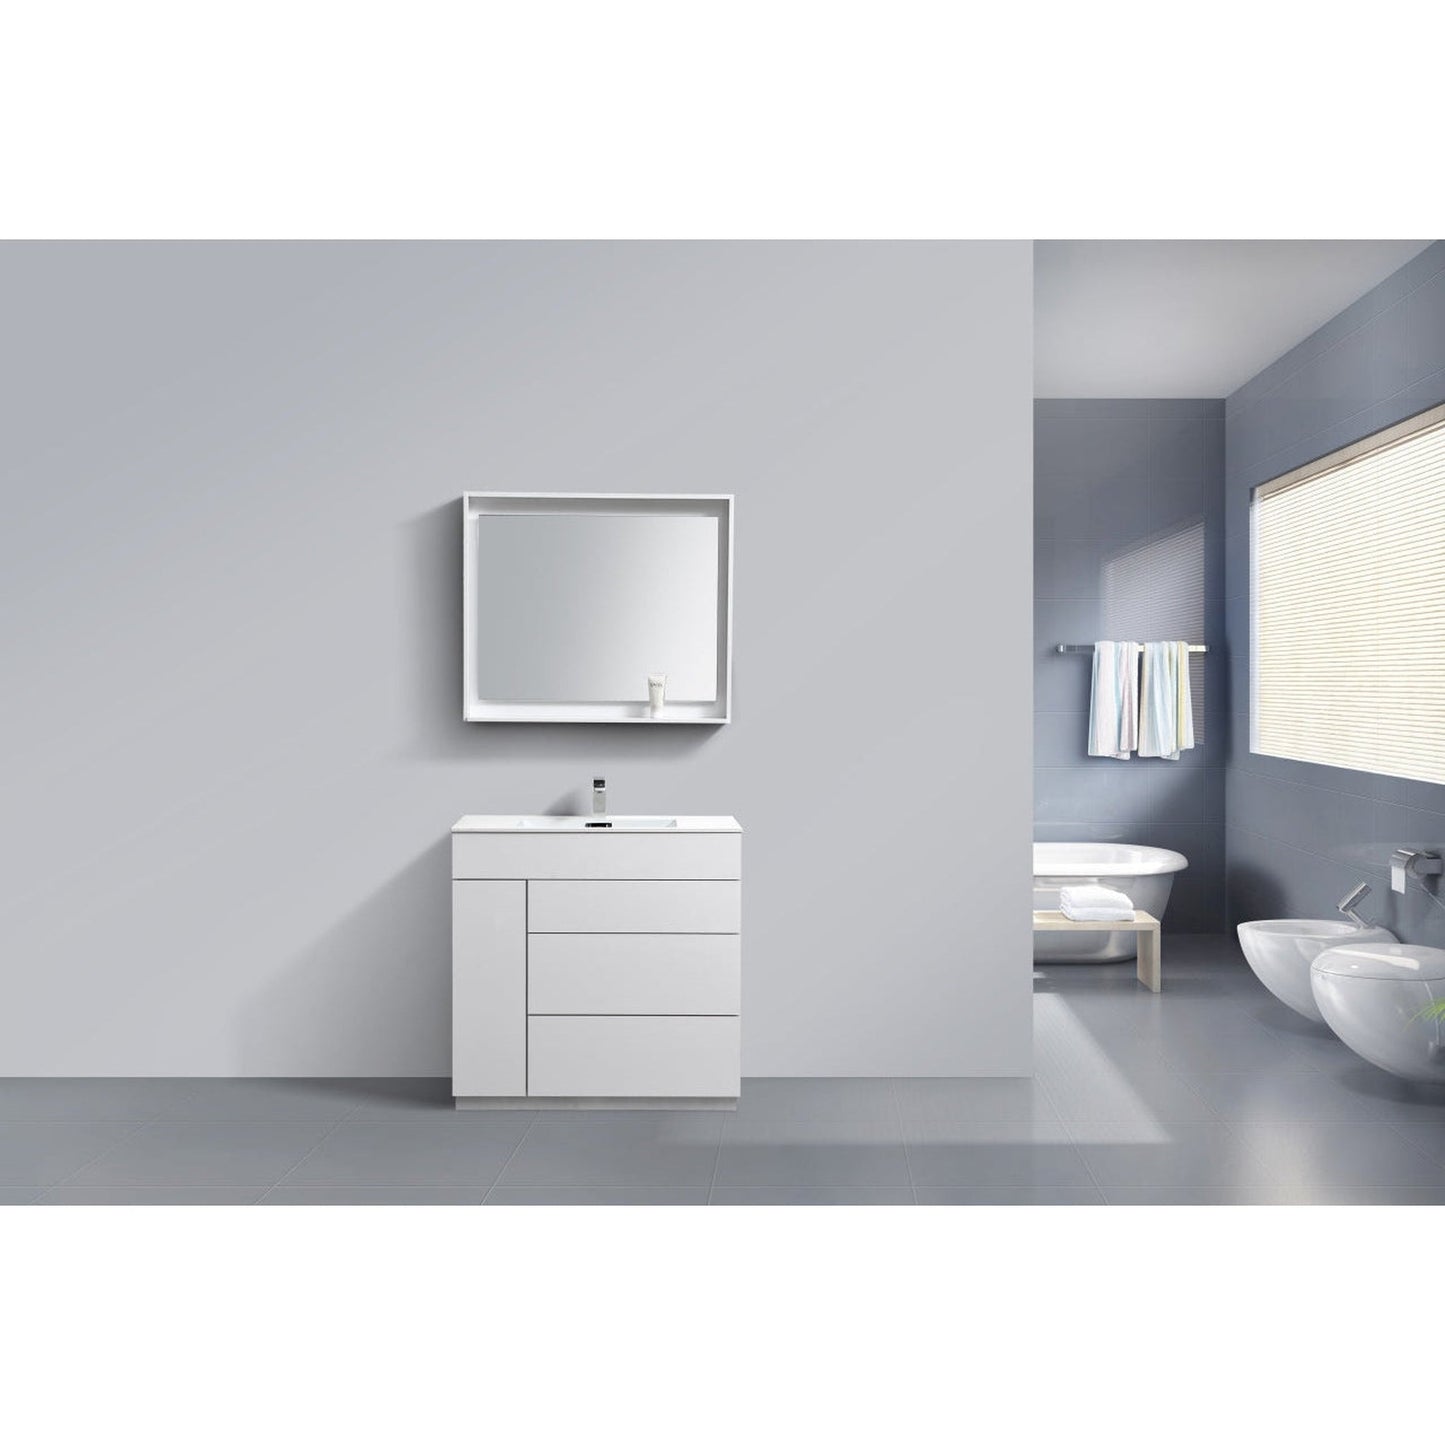 KubeBath Milano 36" High Gloss White Freestanding Modern Bathroom Vanity With Aluminum Kick Plate & Acrylic Composite Integrated Sink With Overflow and 36" White Framed Mirror With Shelf